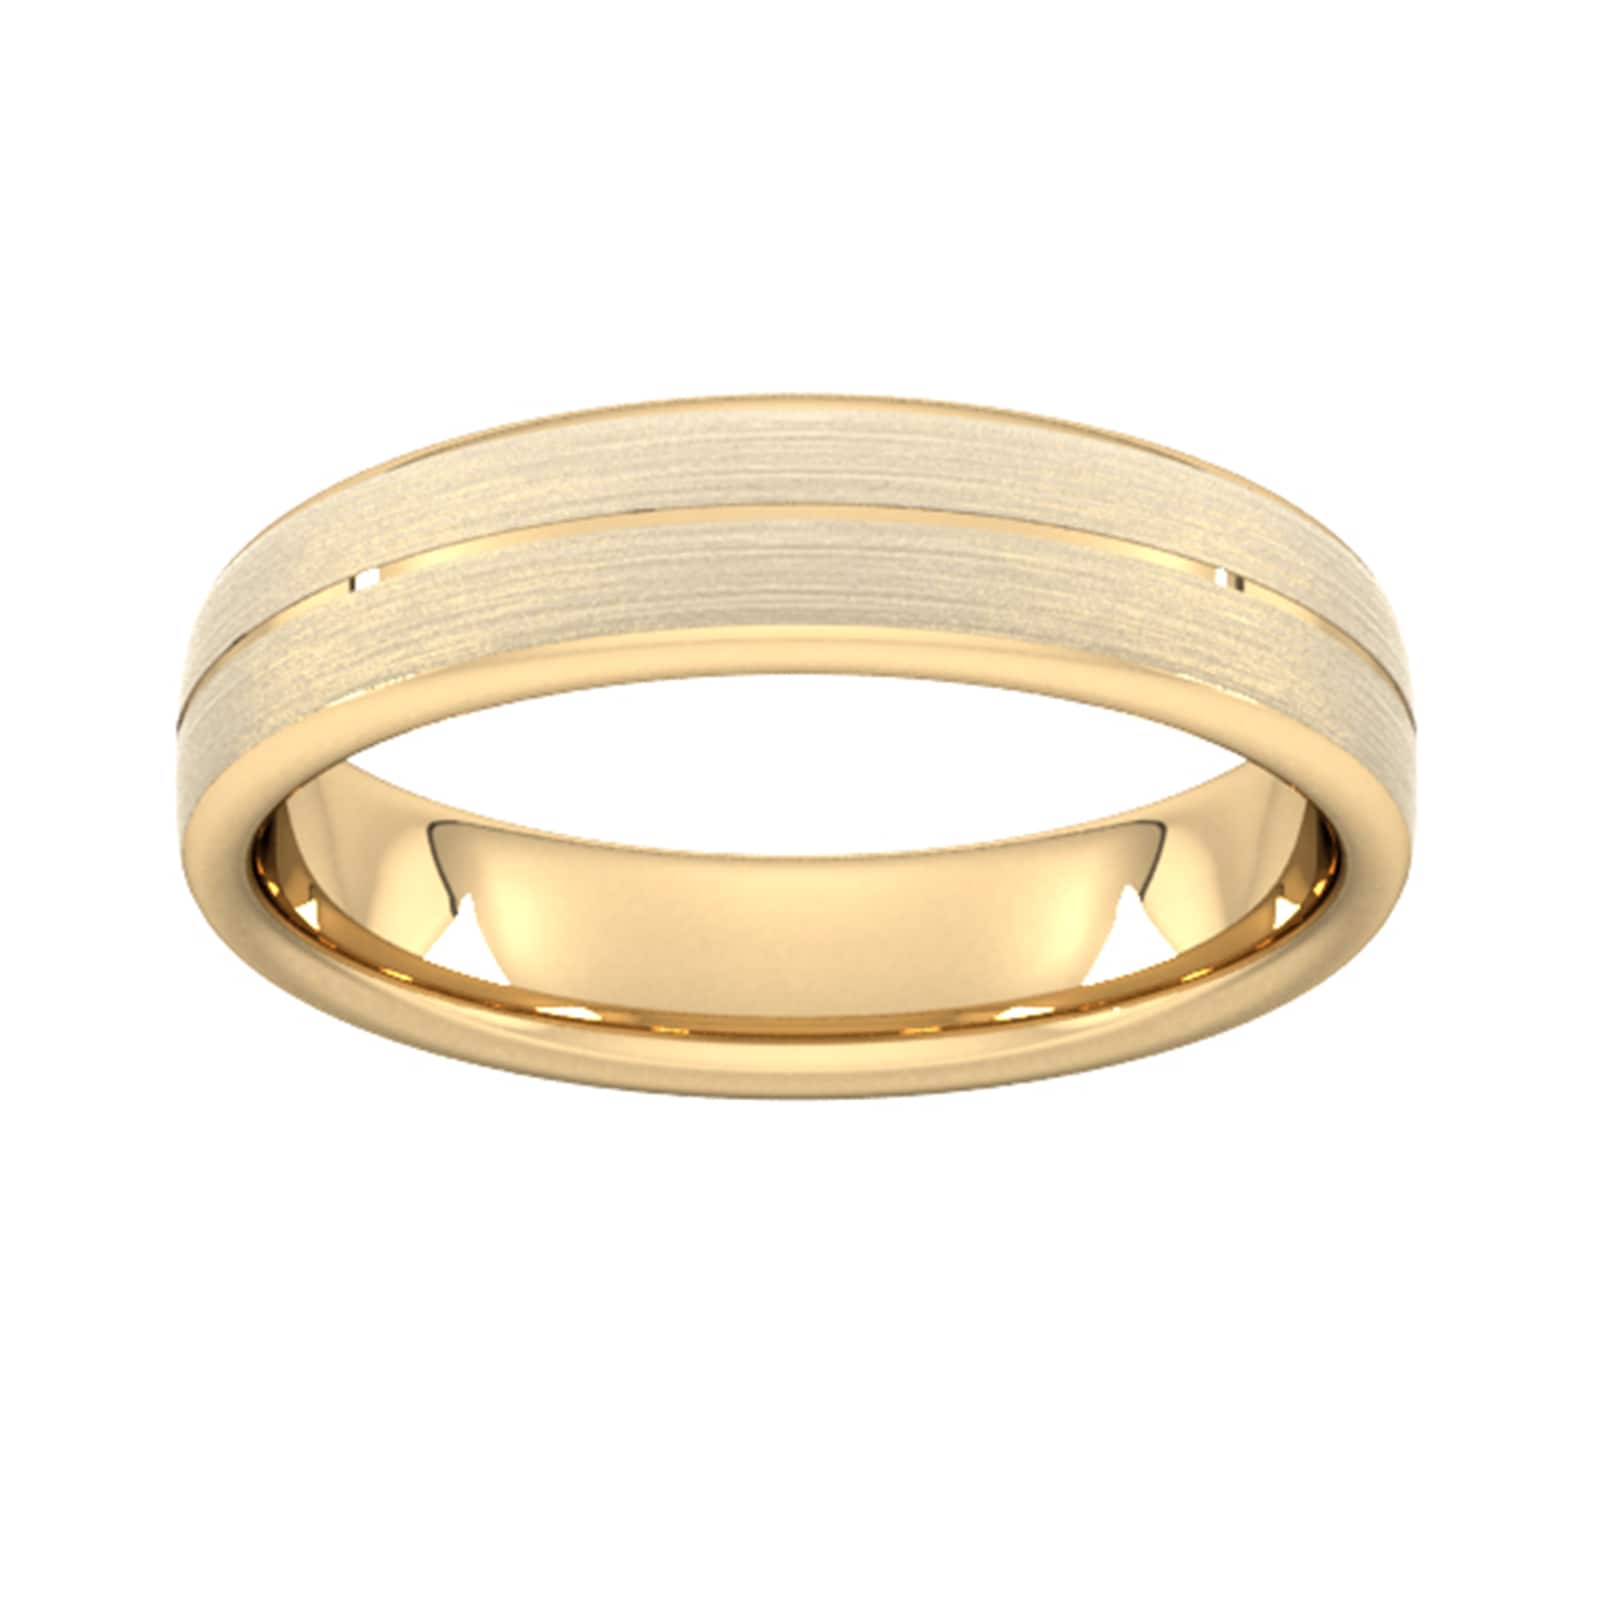 5mm Slight Court Extra Heavy Centre Groove With Chamfered Edge Wedding Ring In 18 Carat Yellow Gold - Ring Size Q